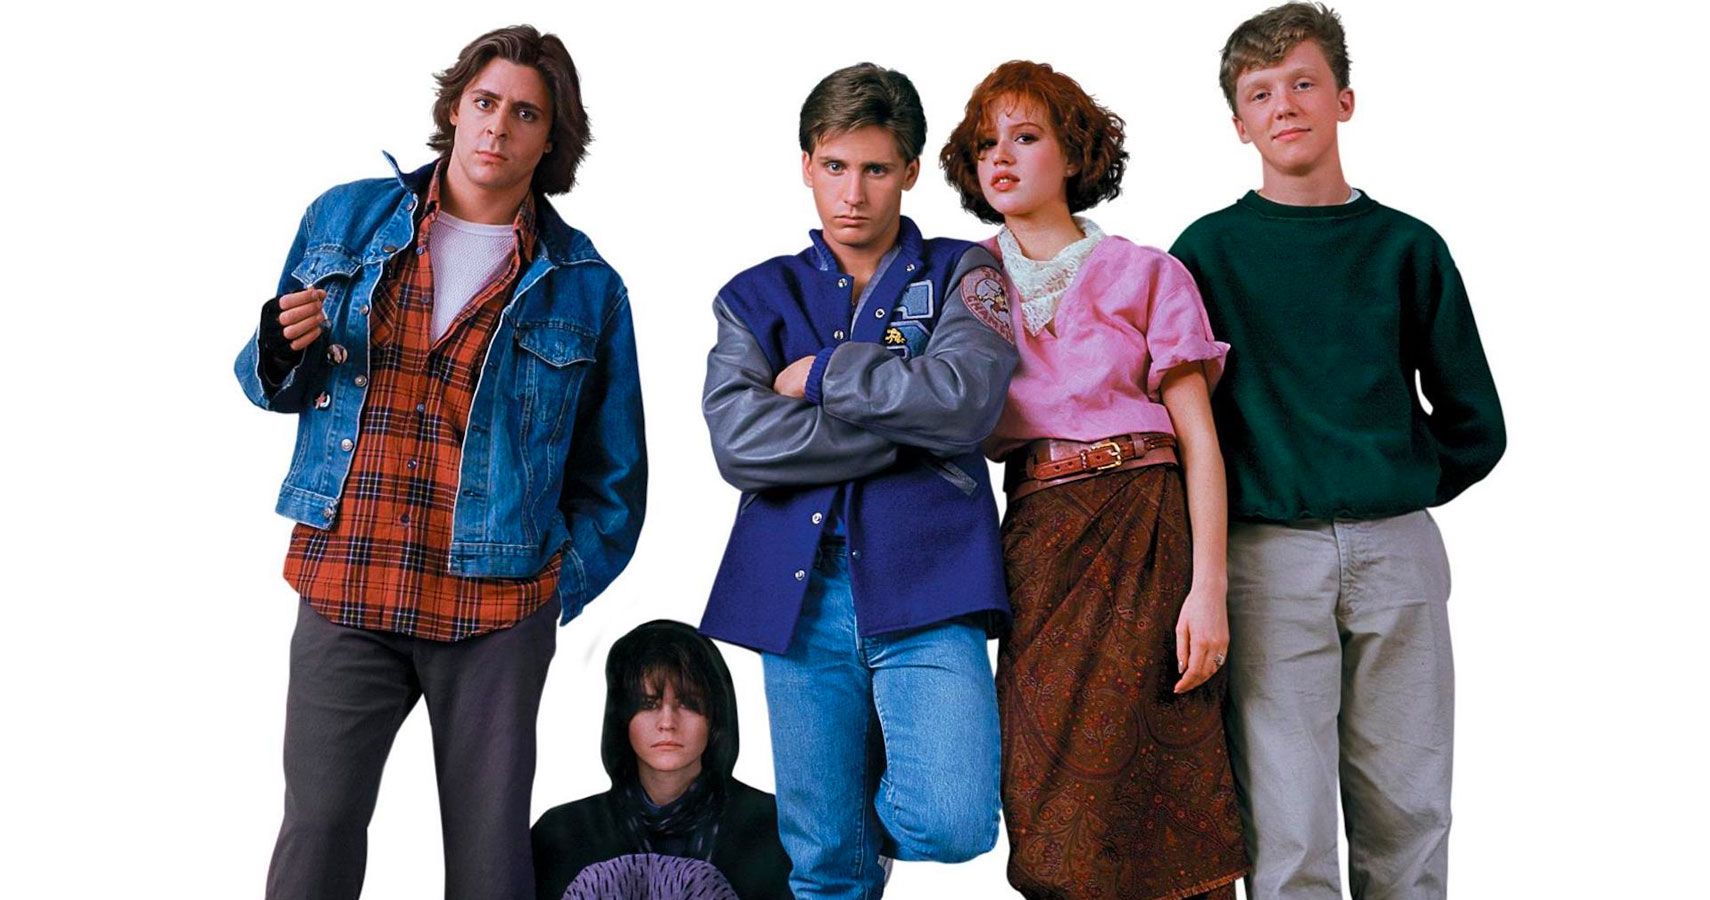 35 Years On Remembering Detention With The Breakfast Club